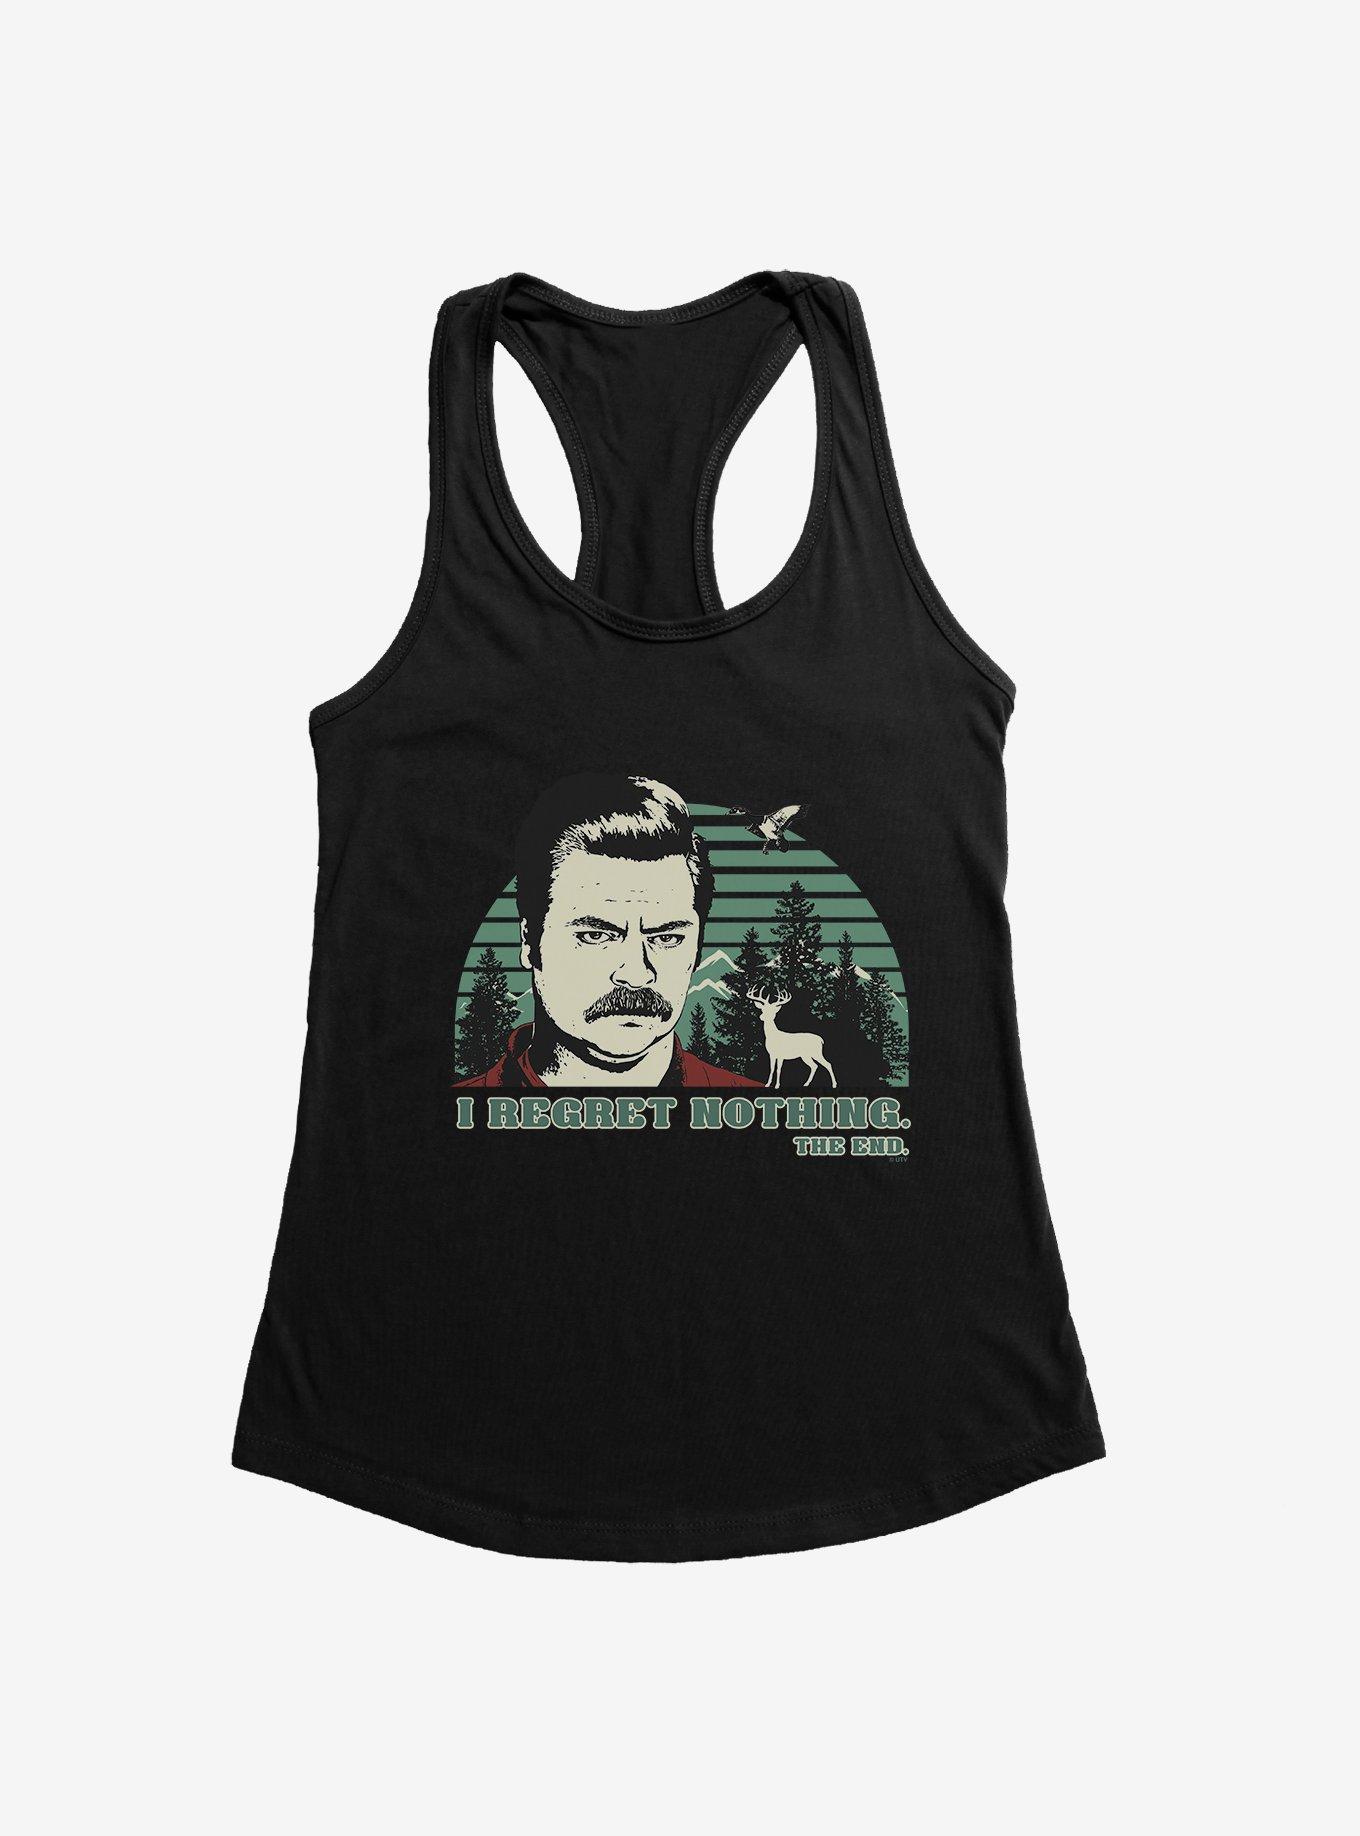 Parks And Recreation I Regret Nothing Girls Tank